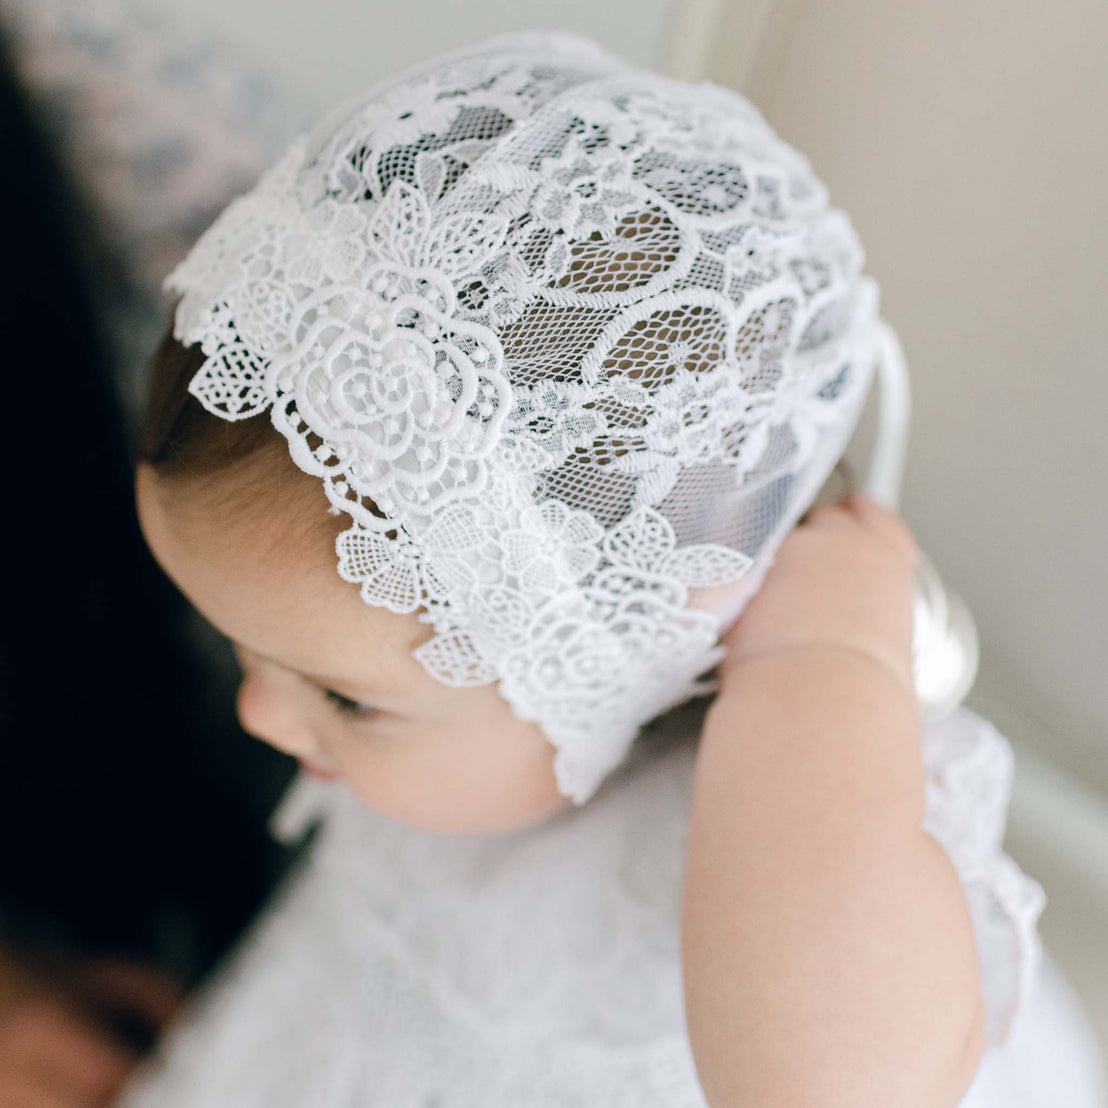 A baby wearing the Olivia Christening Gown & Bonnet looks downward, with a soft focus background enhancing the intricate texture of the lace, perfect for a baptism or as a boutique baby gift.